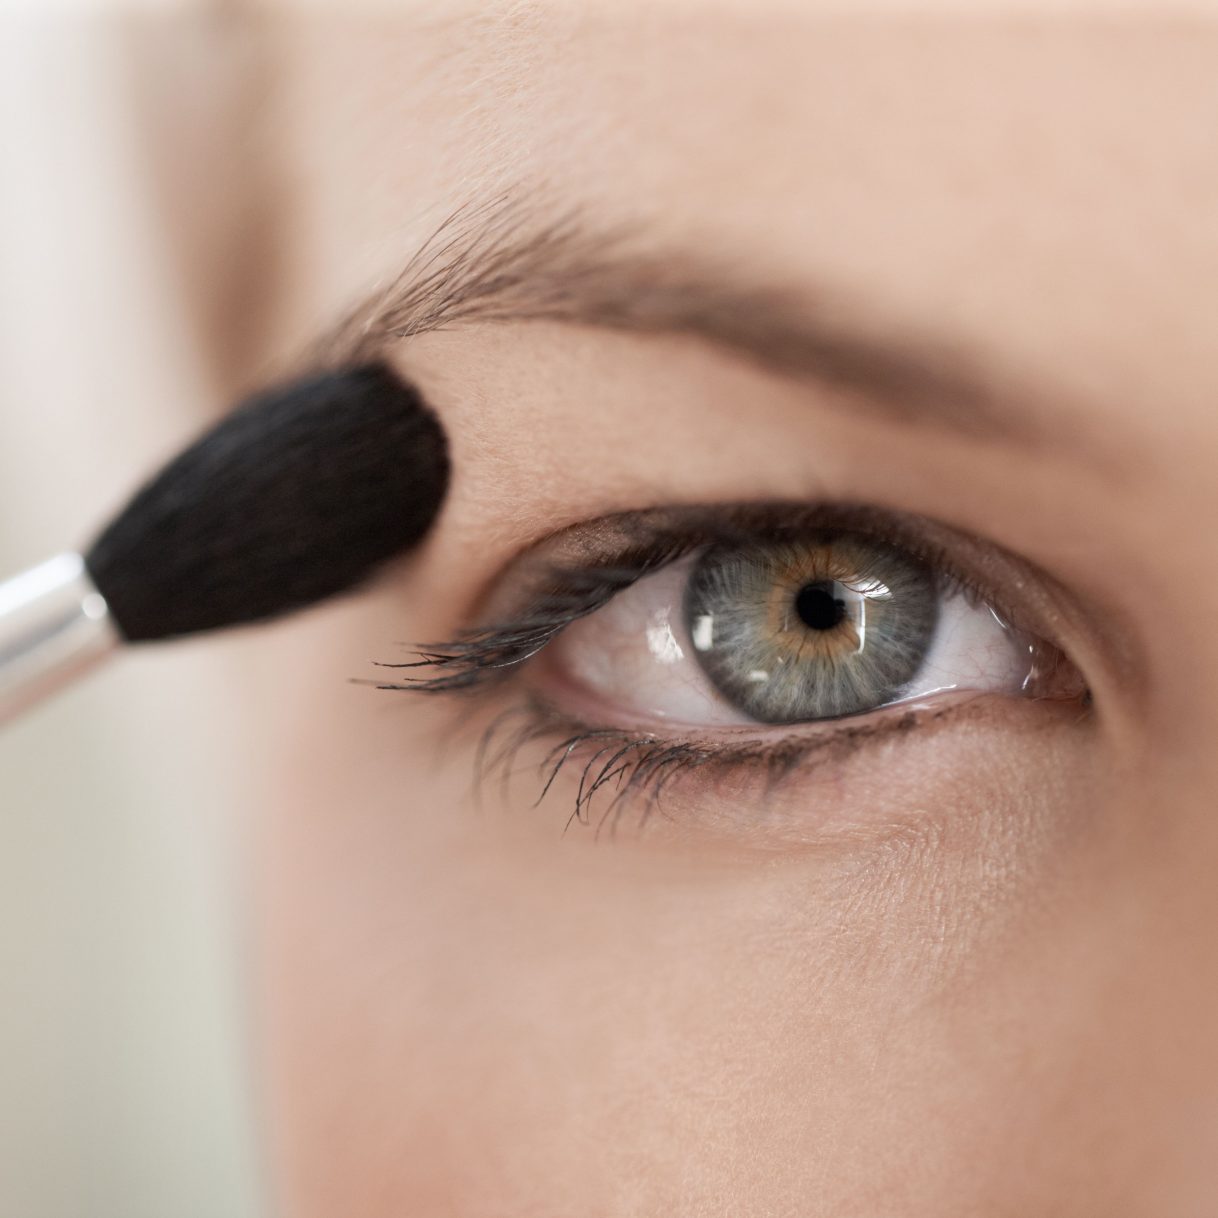 Makeup Ideas For Brown Eyes Makeup Tricks For Hooded Eyes Hooded Eyes Makeup Tips And Tricks